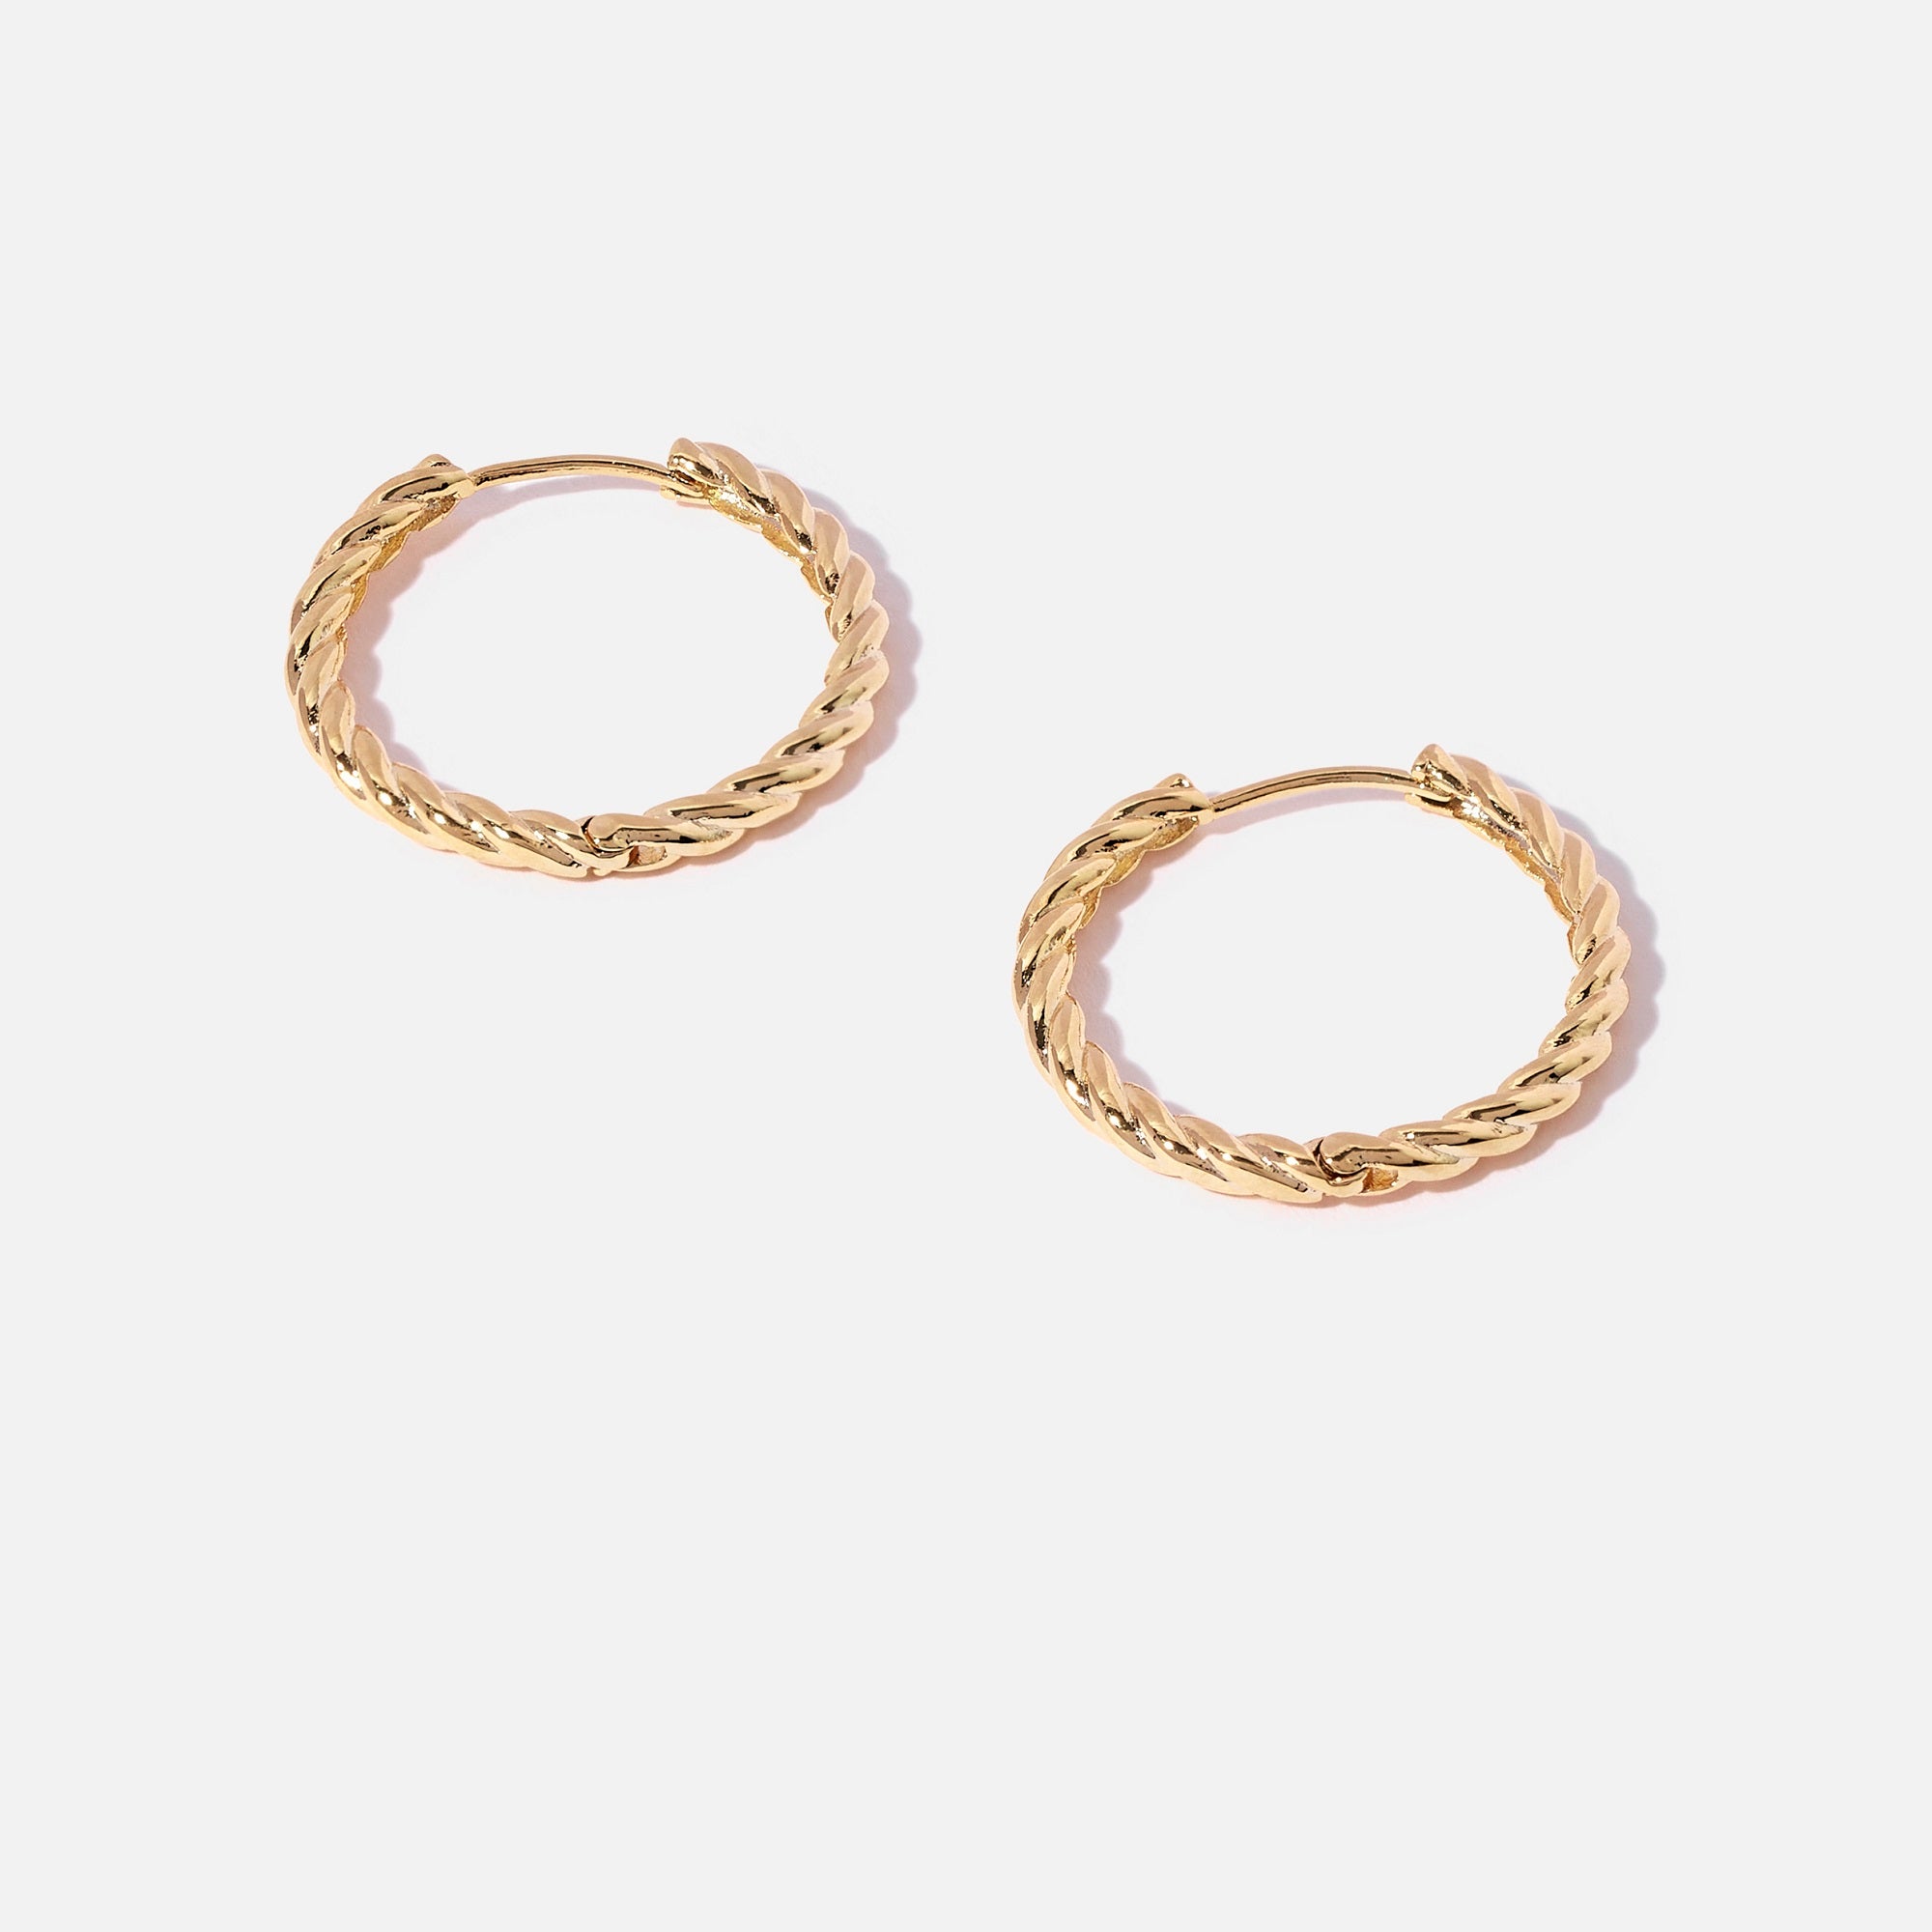 Real Gold Plated Heirloom Large Twist Hoops Earring For Women By Accessorize London